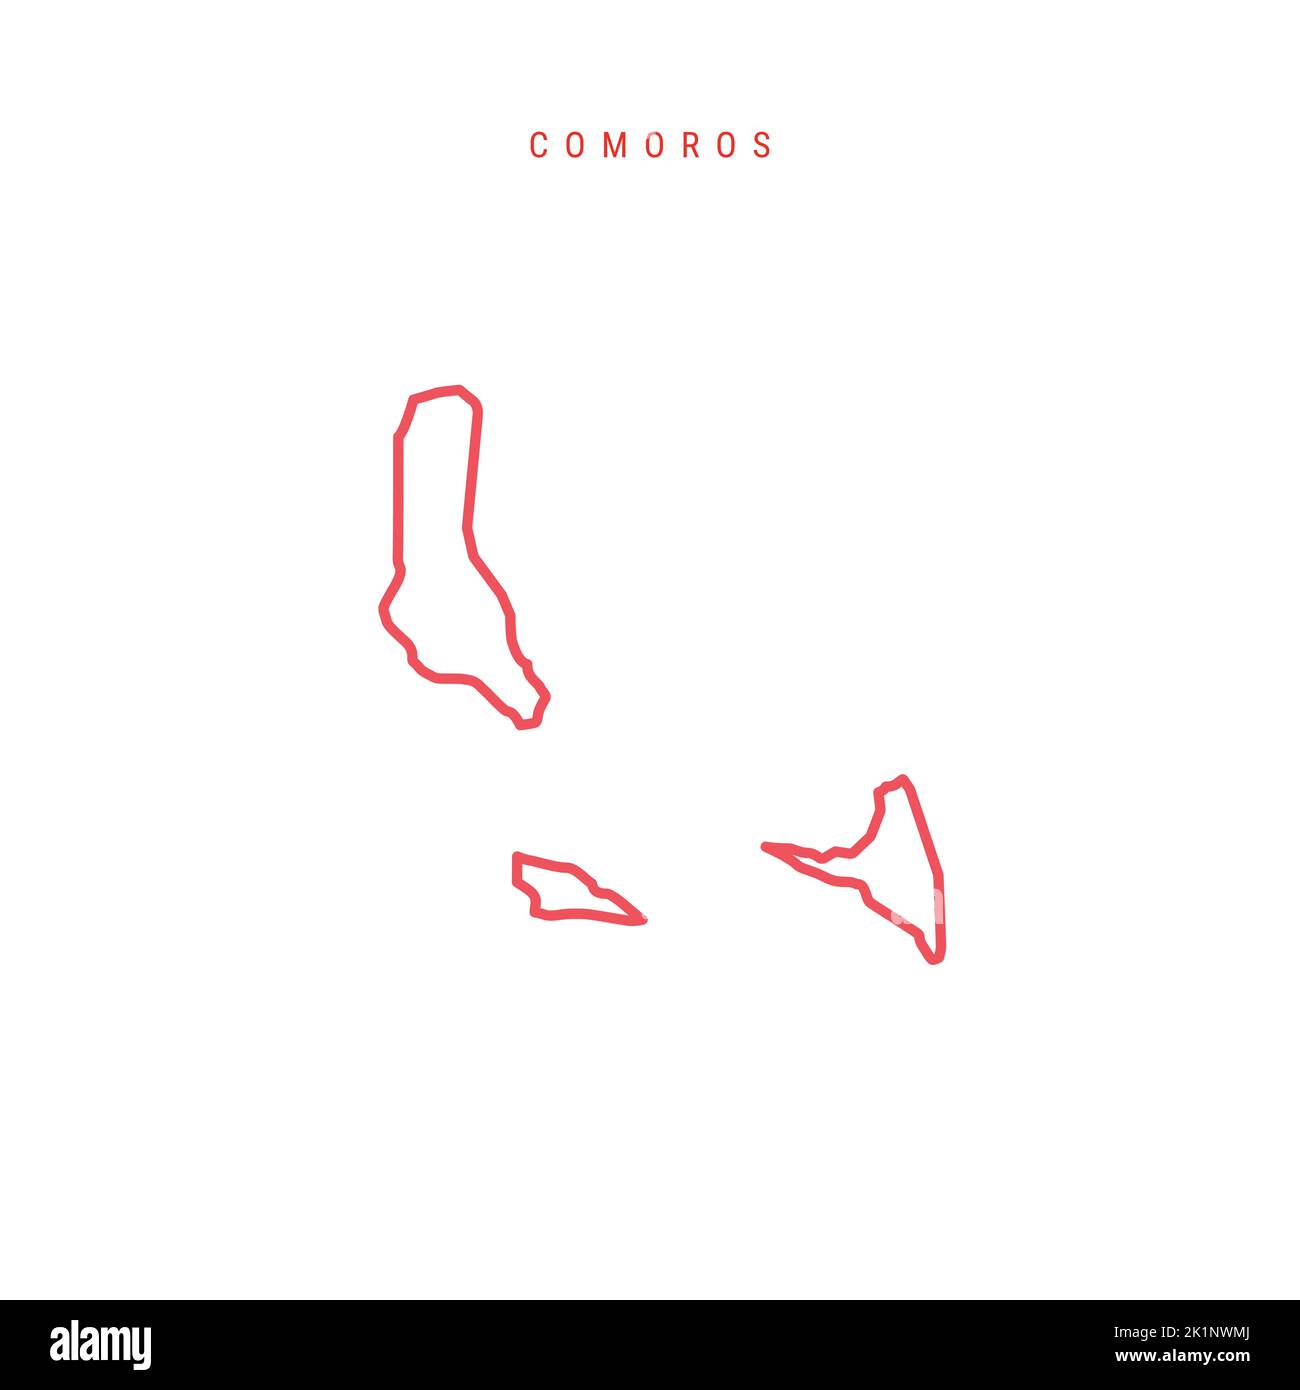 Comoros editable outline map. Union of the Comoros red border. Country name. Adjust line weight. Change to any color. Vector illustration. Stock Vector